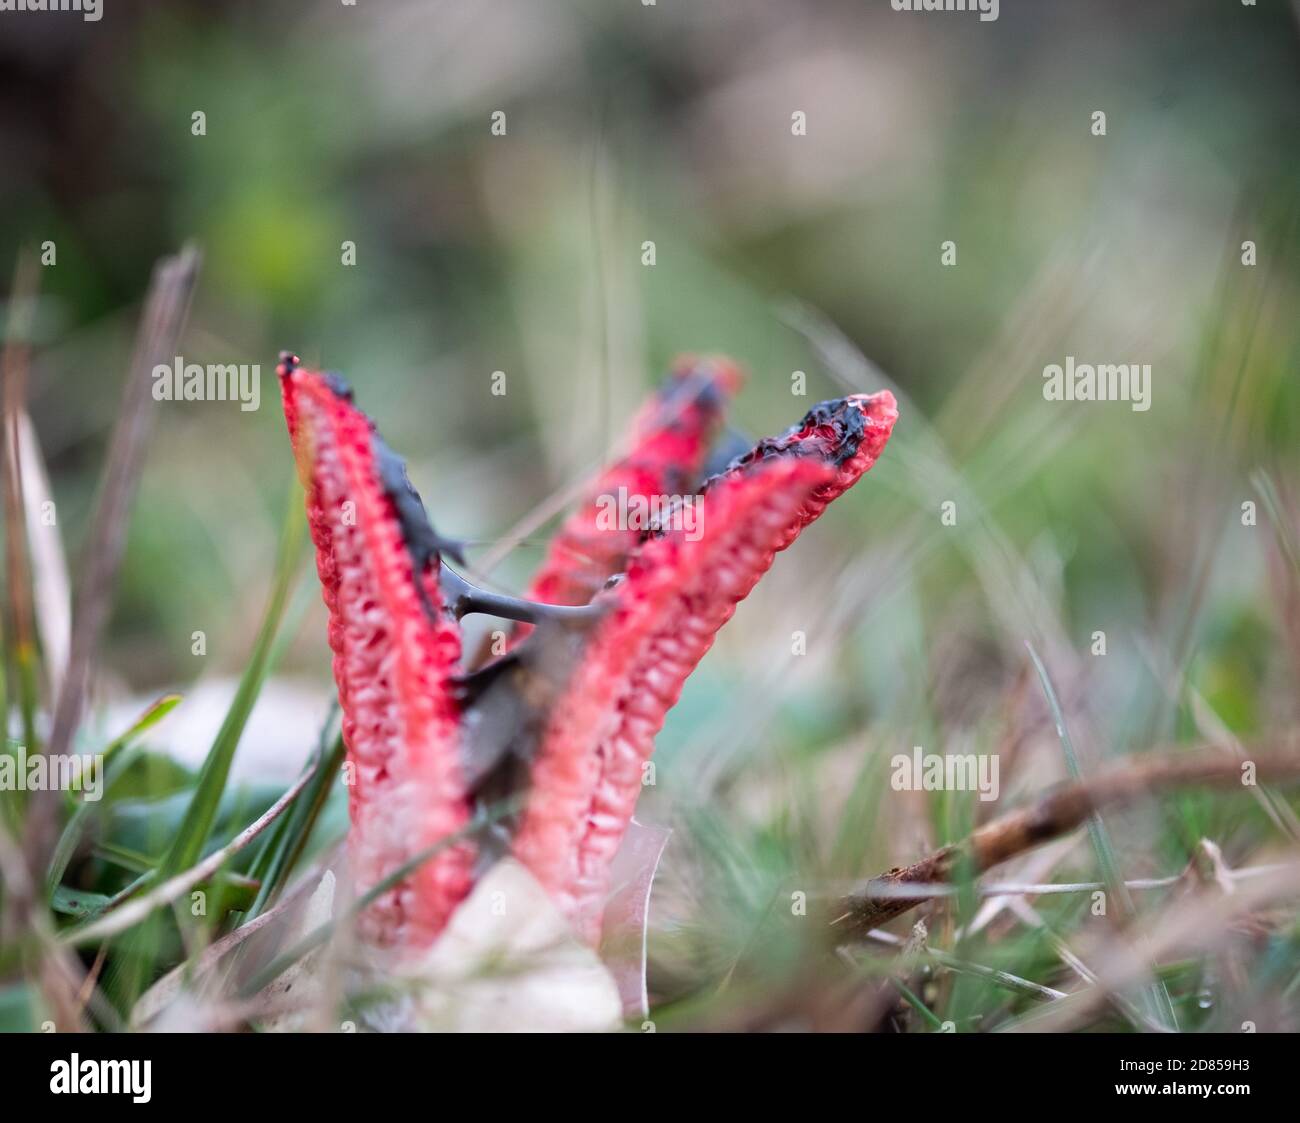 Clathrus archeri, commonly known as octopus stinkhorn, squidward mushroom, or devil's fingers erupting from a suberumpent egg. New Forest, England. Stock Photo